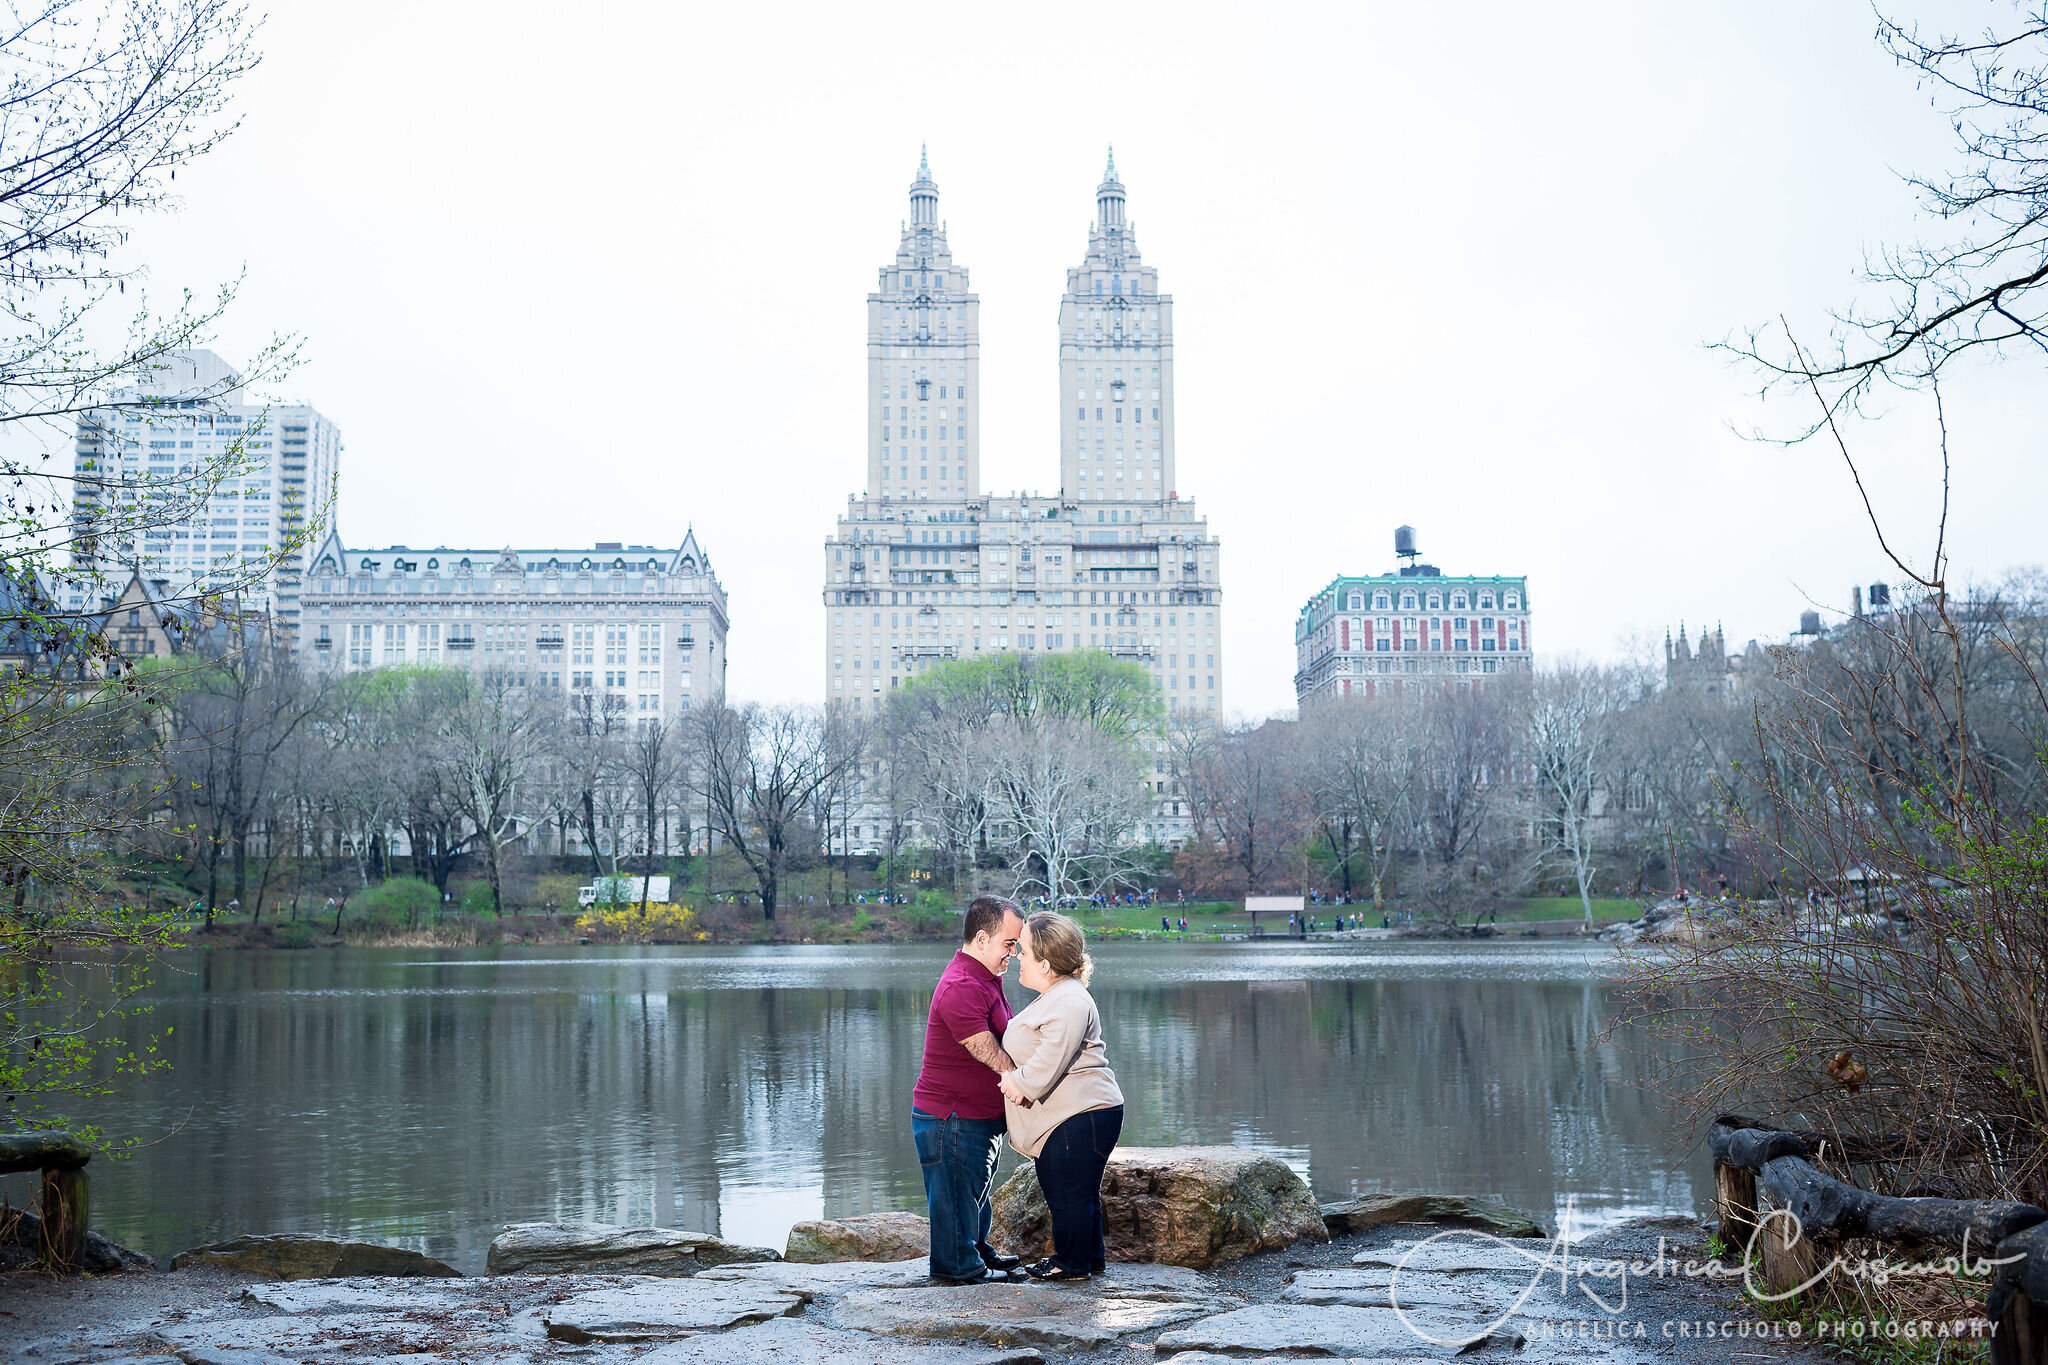  New York Central Park Engagement Wedding Photos - Cherry Blossoms ©2019 Angelica Criscuolo Photography | All Rights Reserved | www.AngelicaCriscuoloPhotography.com | www.facebook.com/AngelicaCriscuoloPhotography 